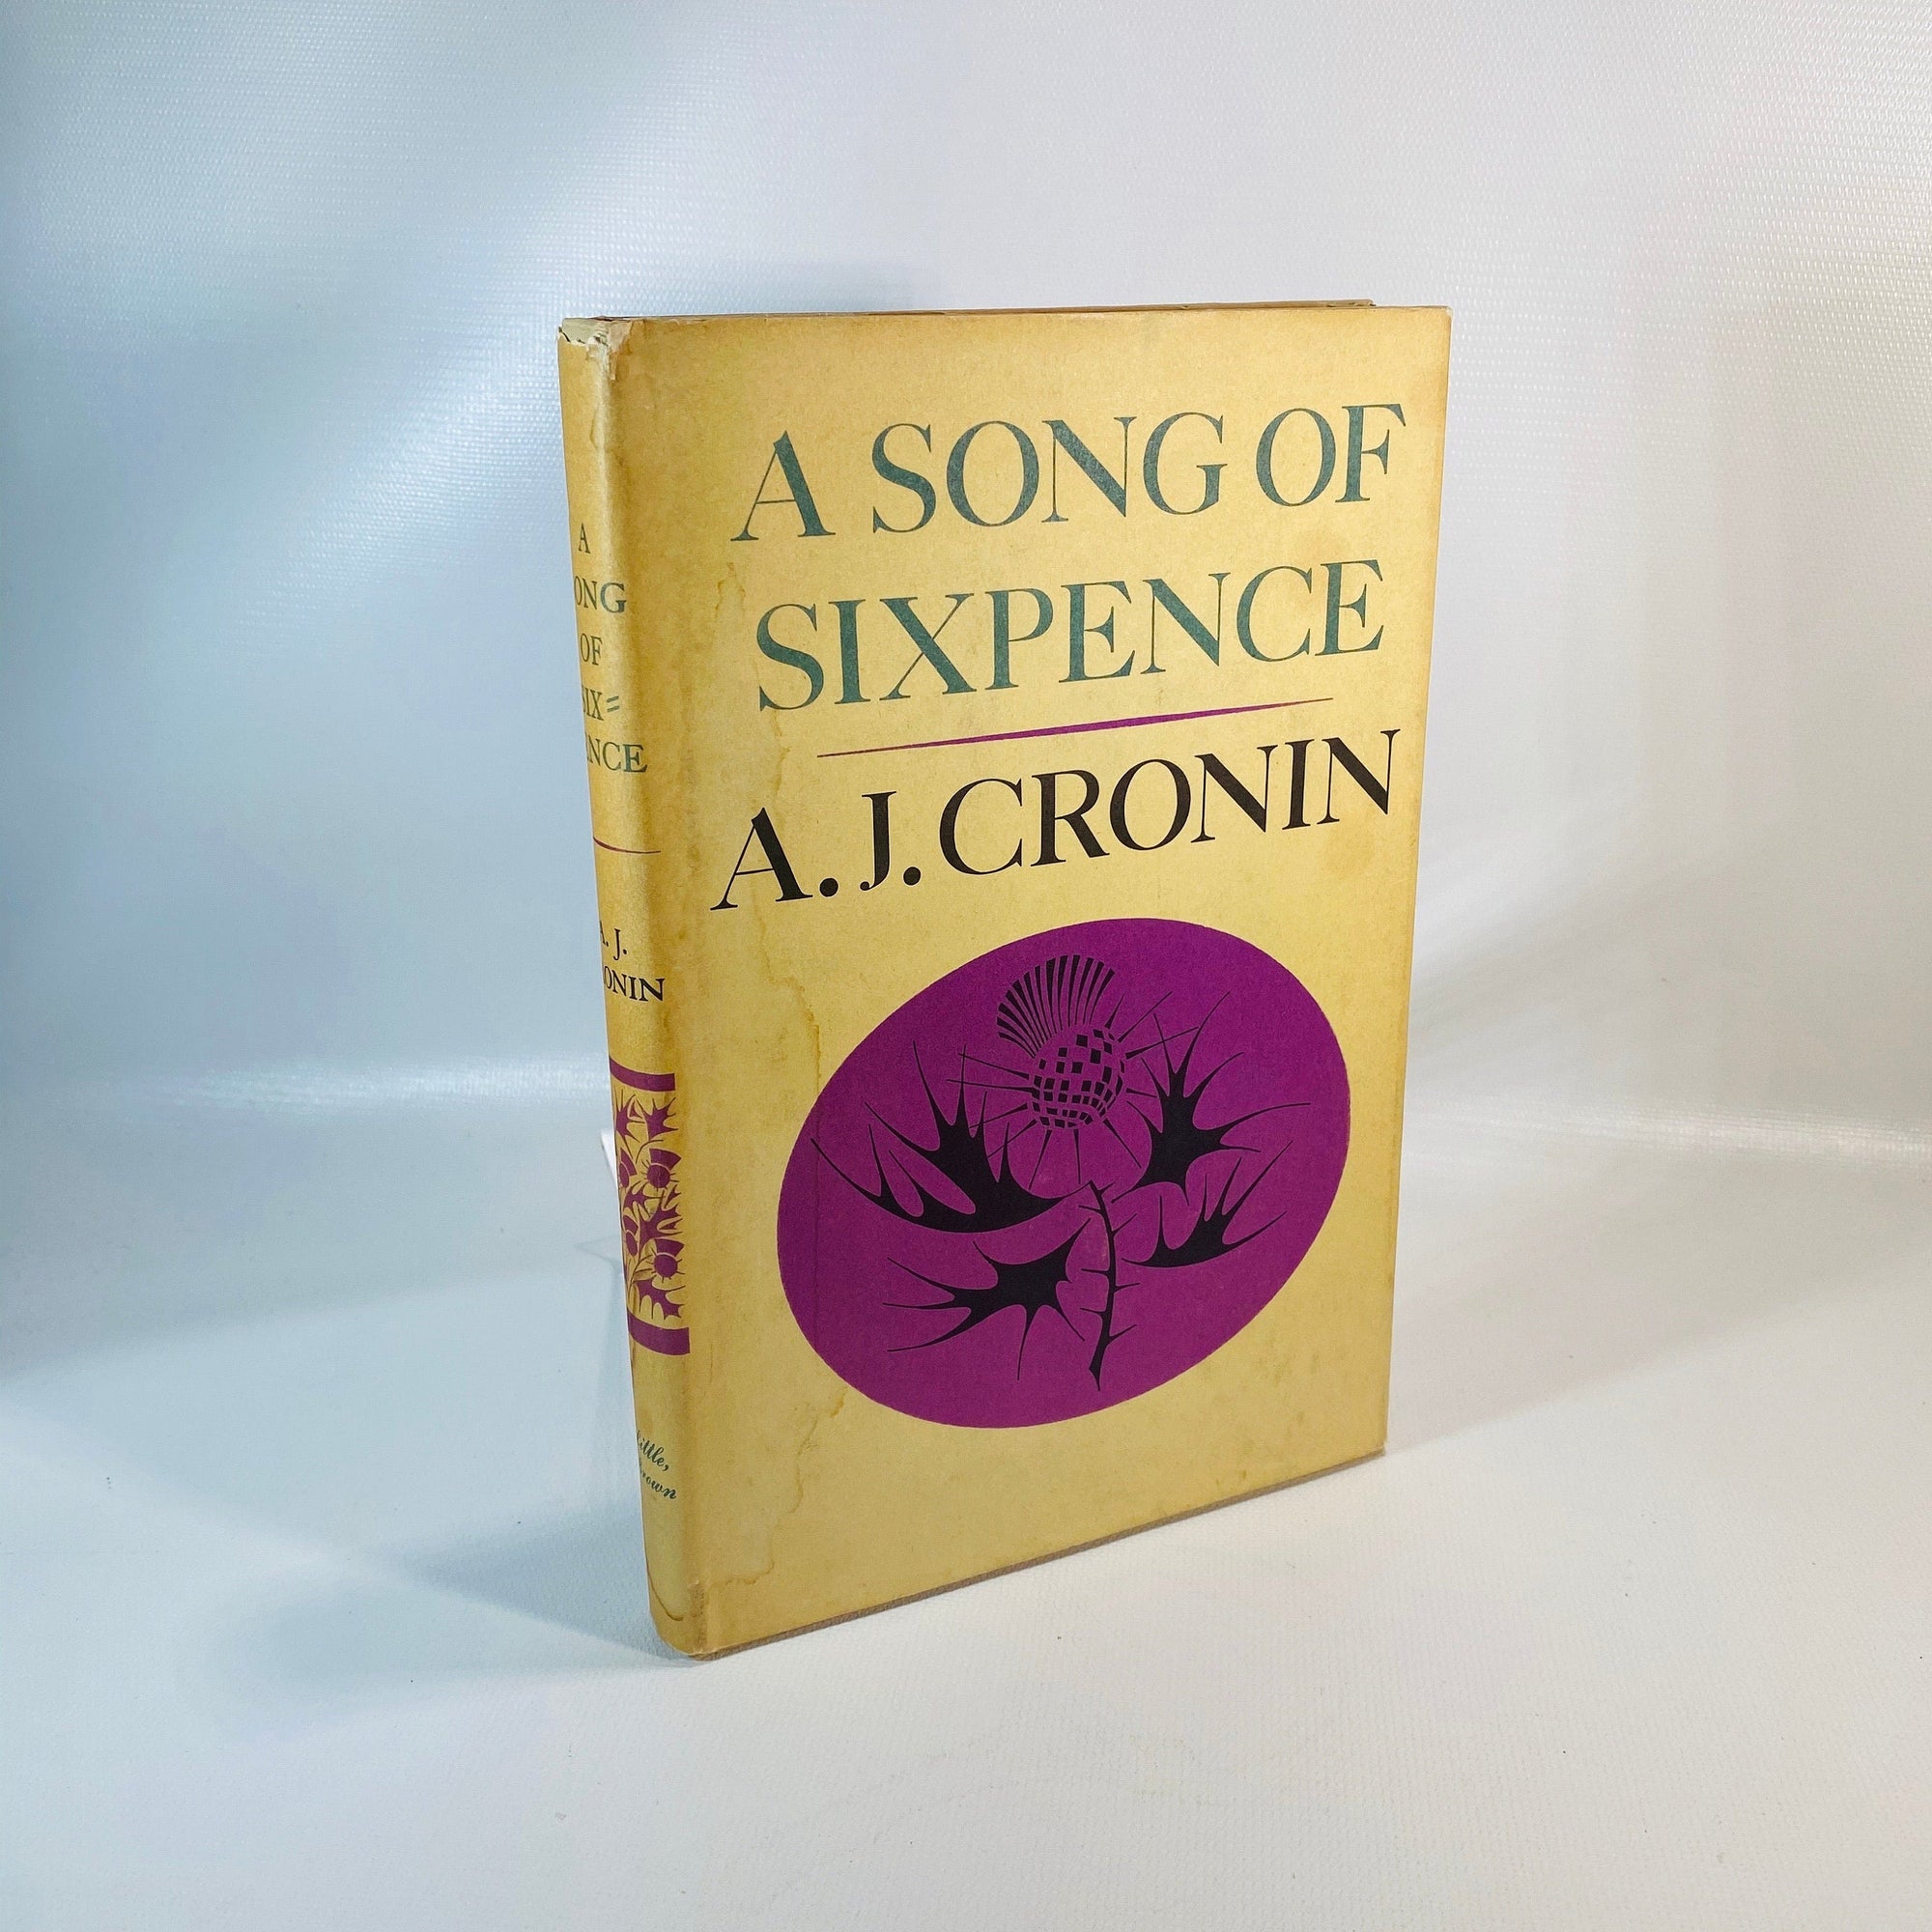 A Song of Sixpence by A.J. Cronin 1964 Vintage Book